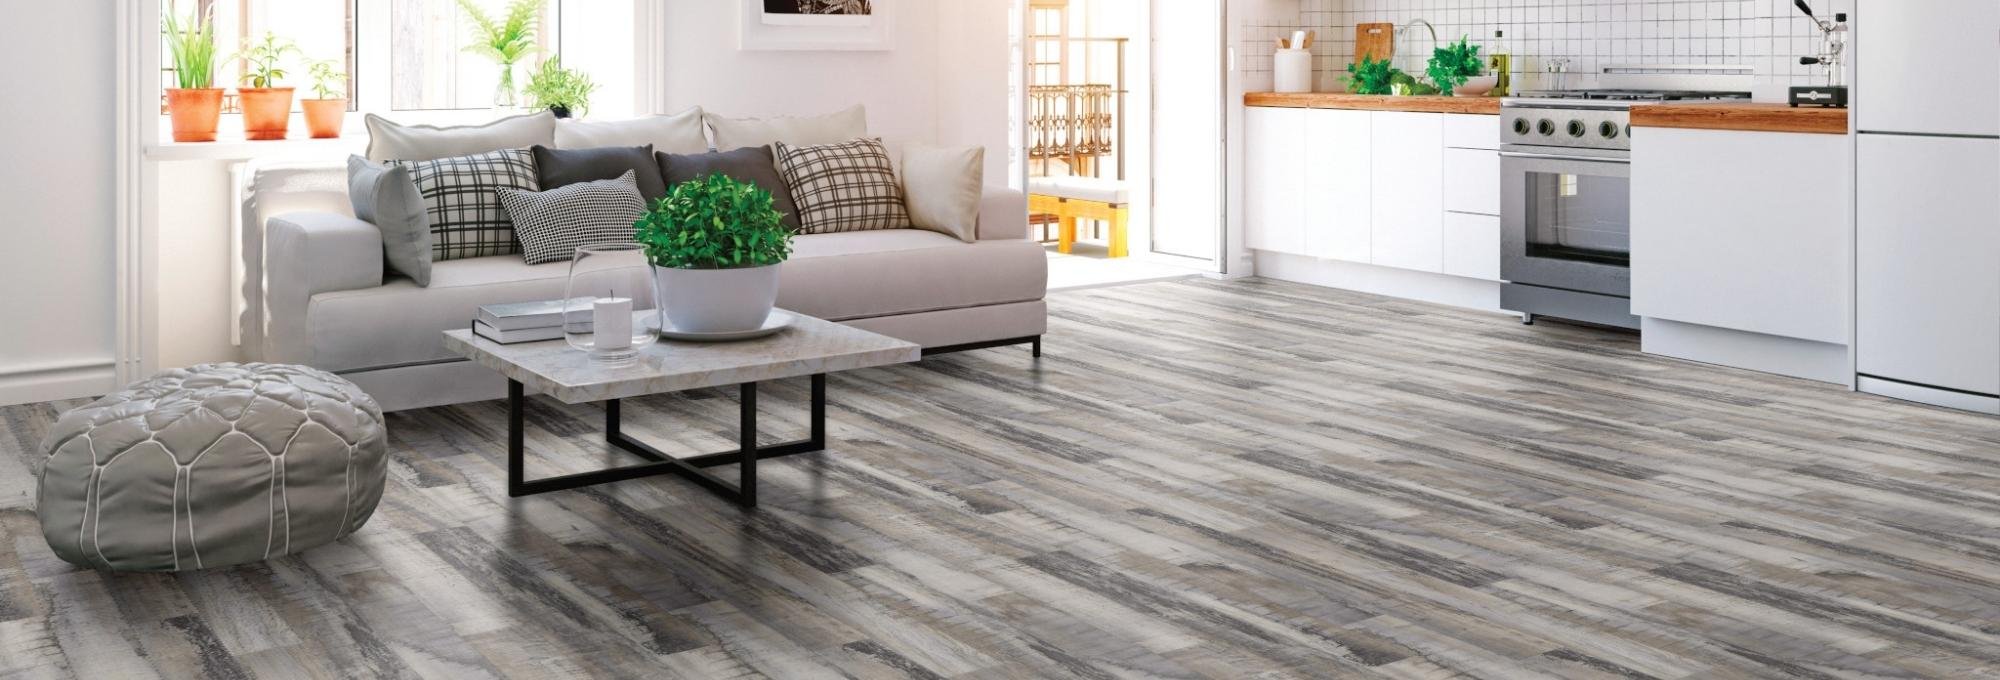 Flooring Advice from experts in Mineral